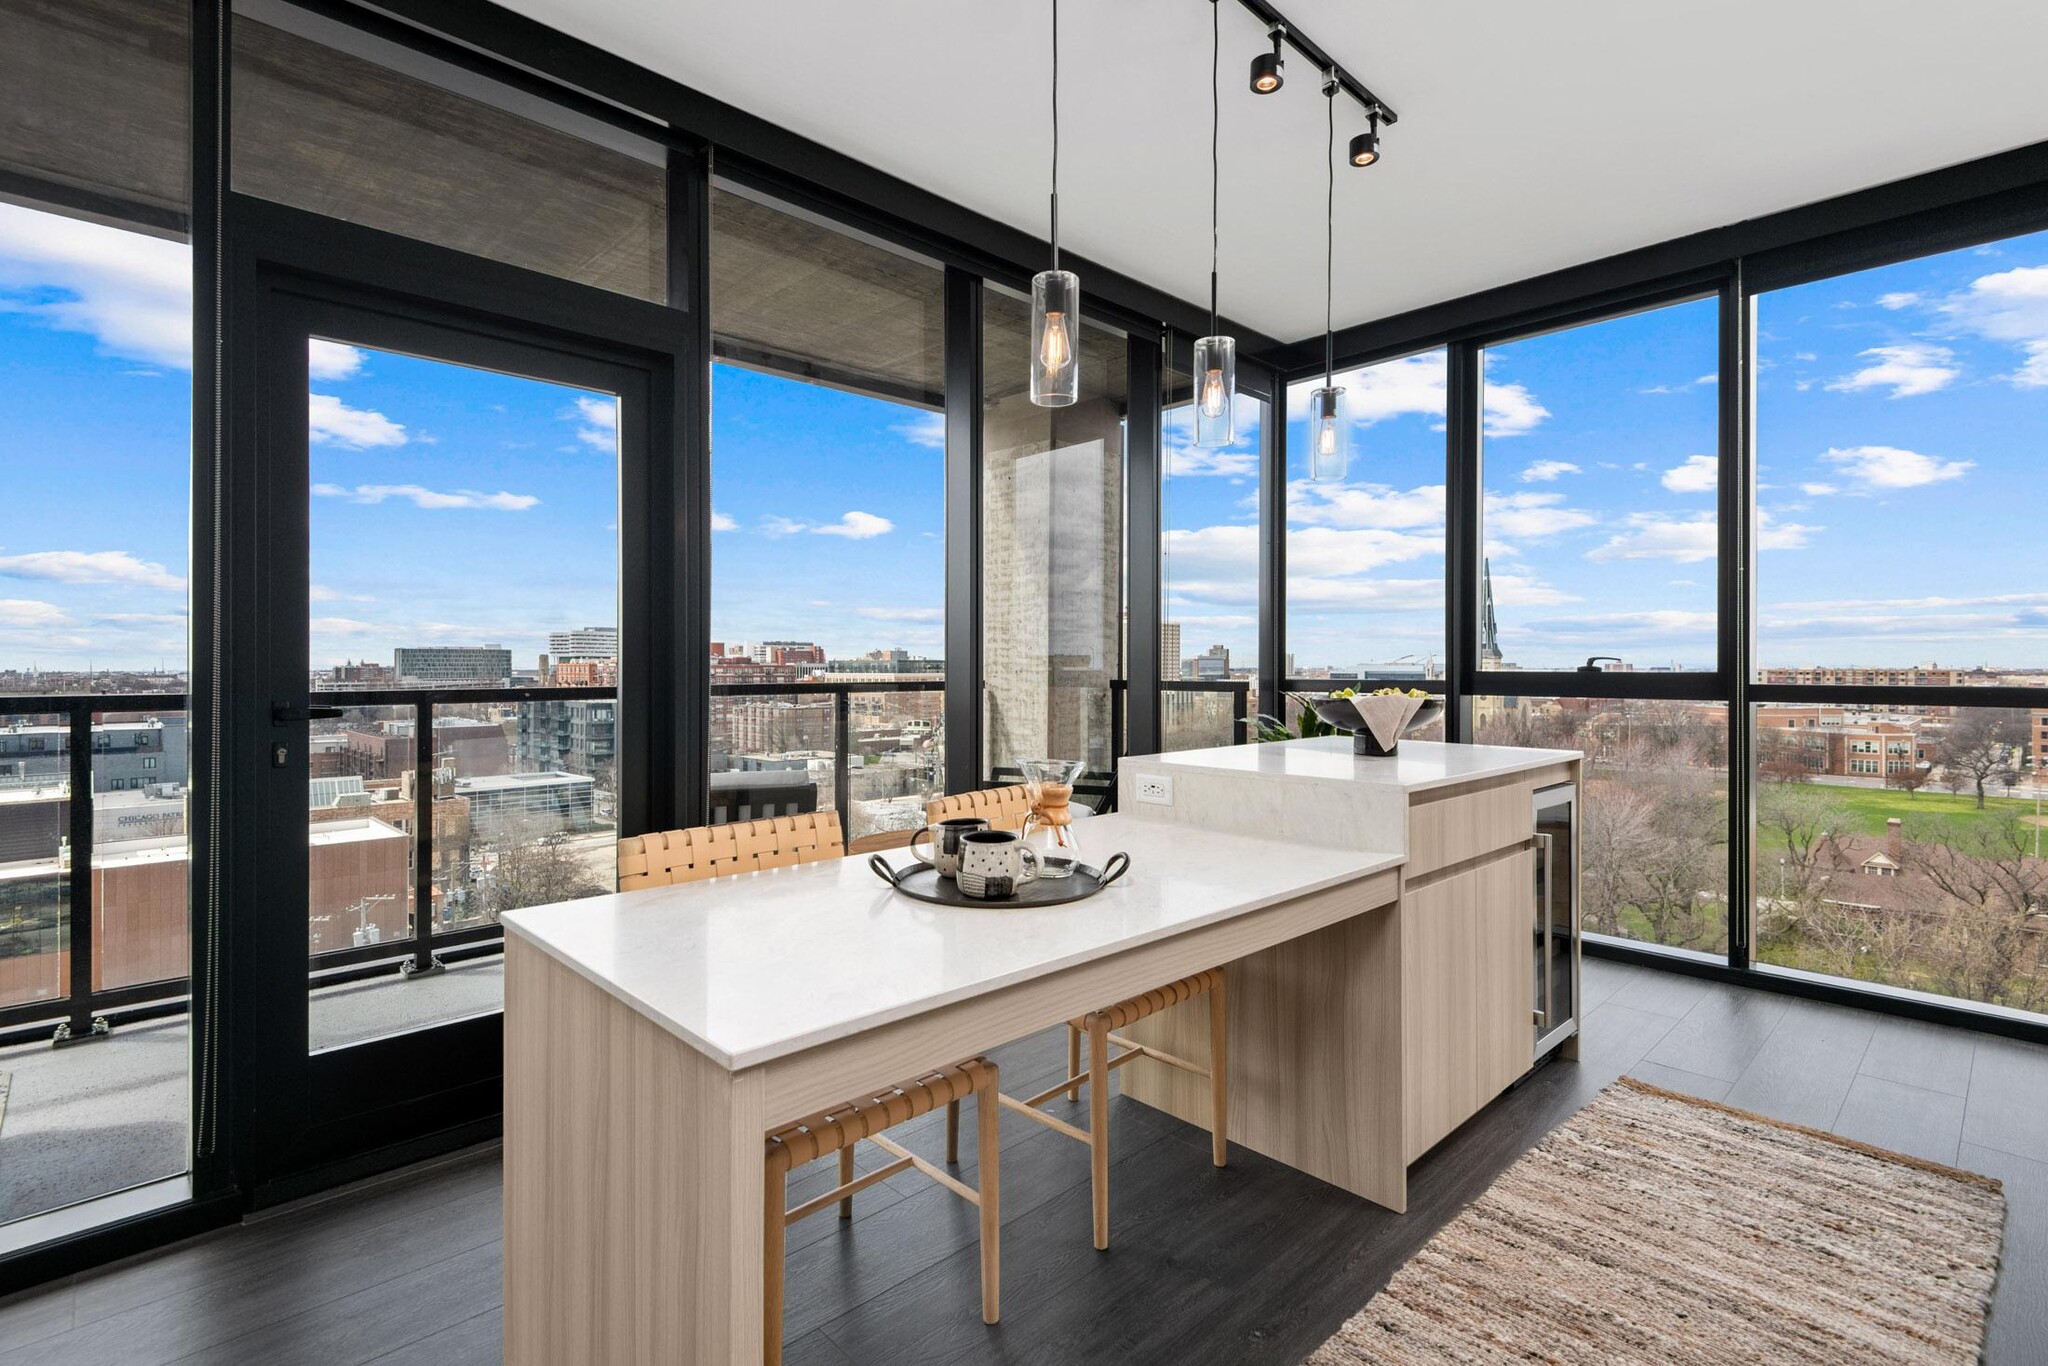 https://www.downtownapartmentcompany.com/wp-content/uploads/2022/04/Now-Renting-Luxury-2-Bedroom-in-the-West-Loop-Neighborhood.-Rent-at-Parq-Fulton-near-the-West-Loop.13.jpg